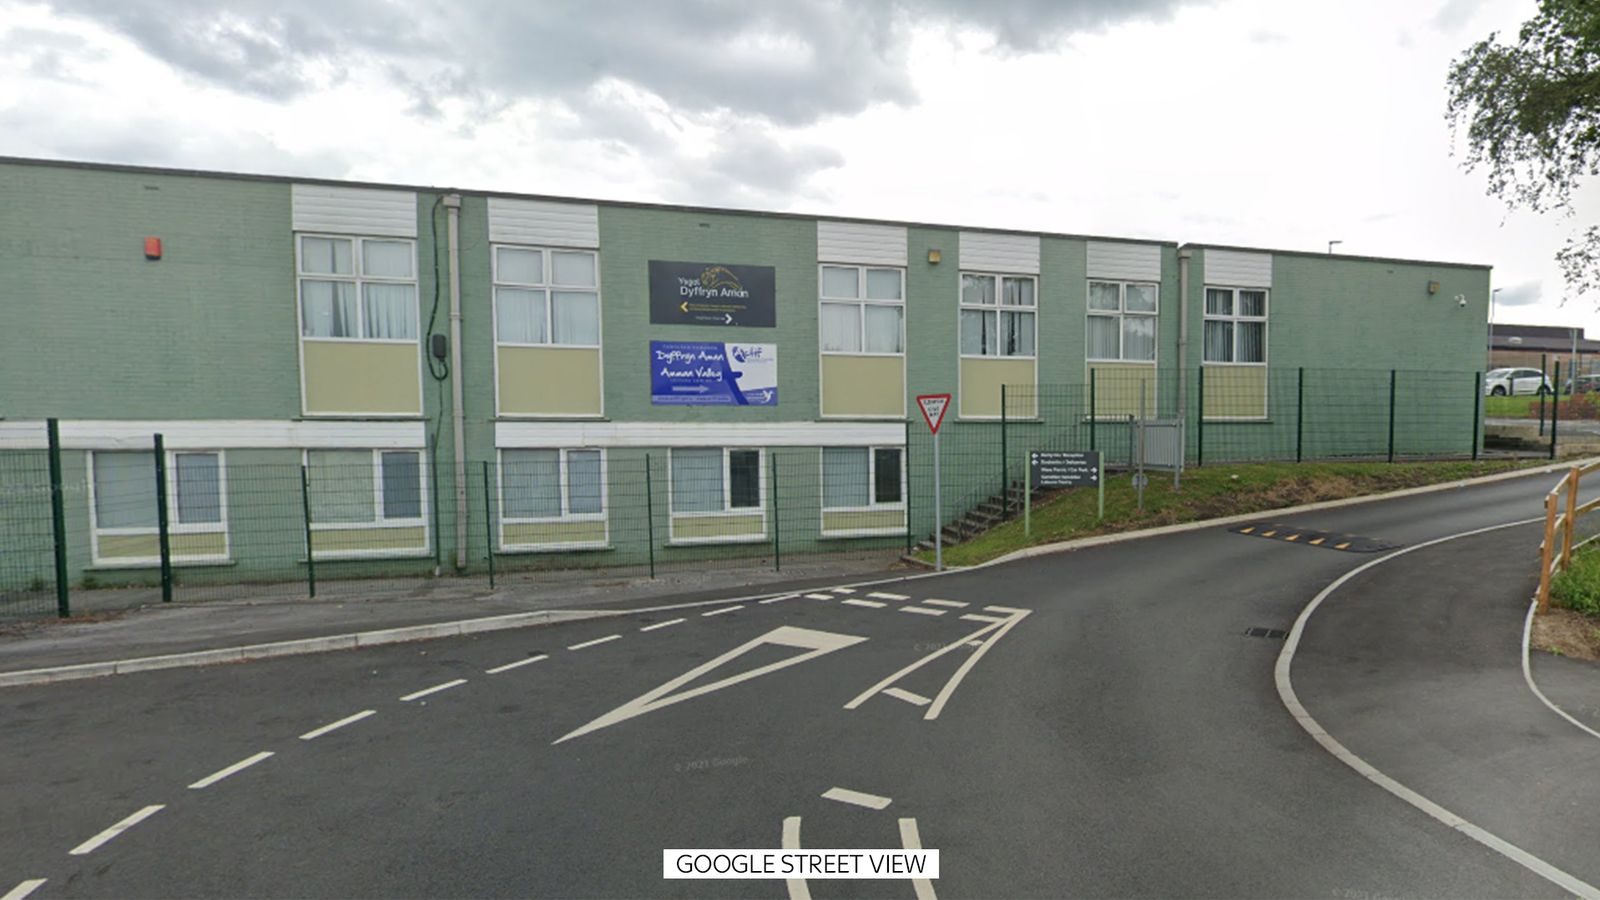 Three people hurt and one arrested during 'major incident' at school in Ammanford in West Wales